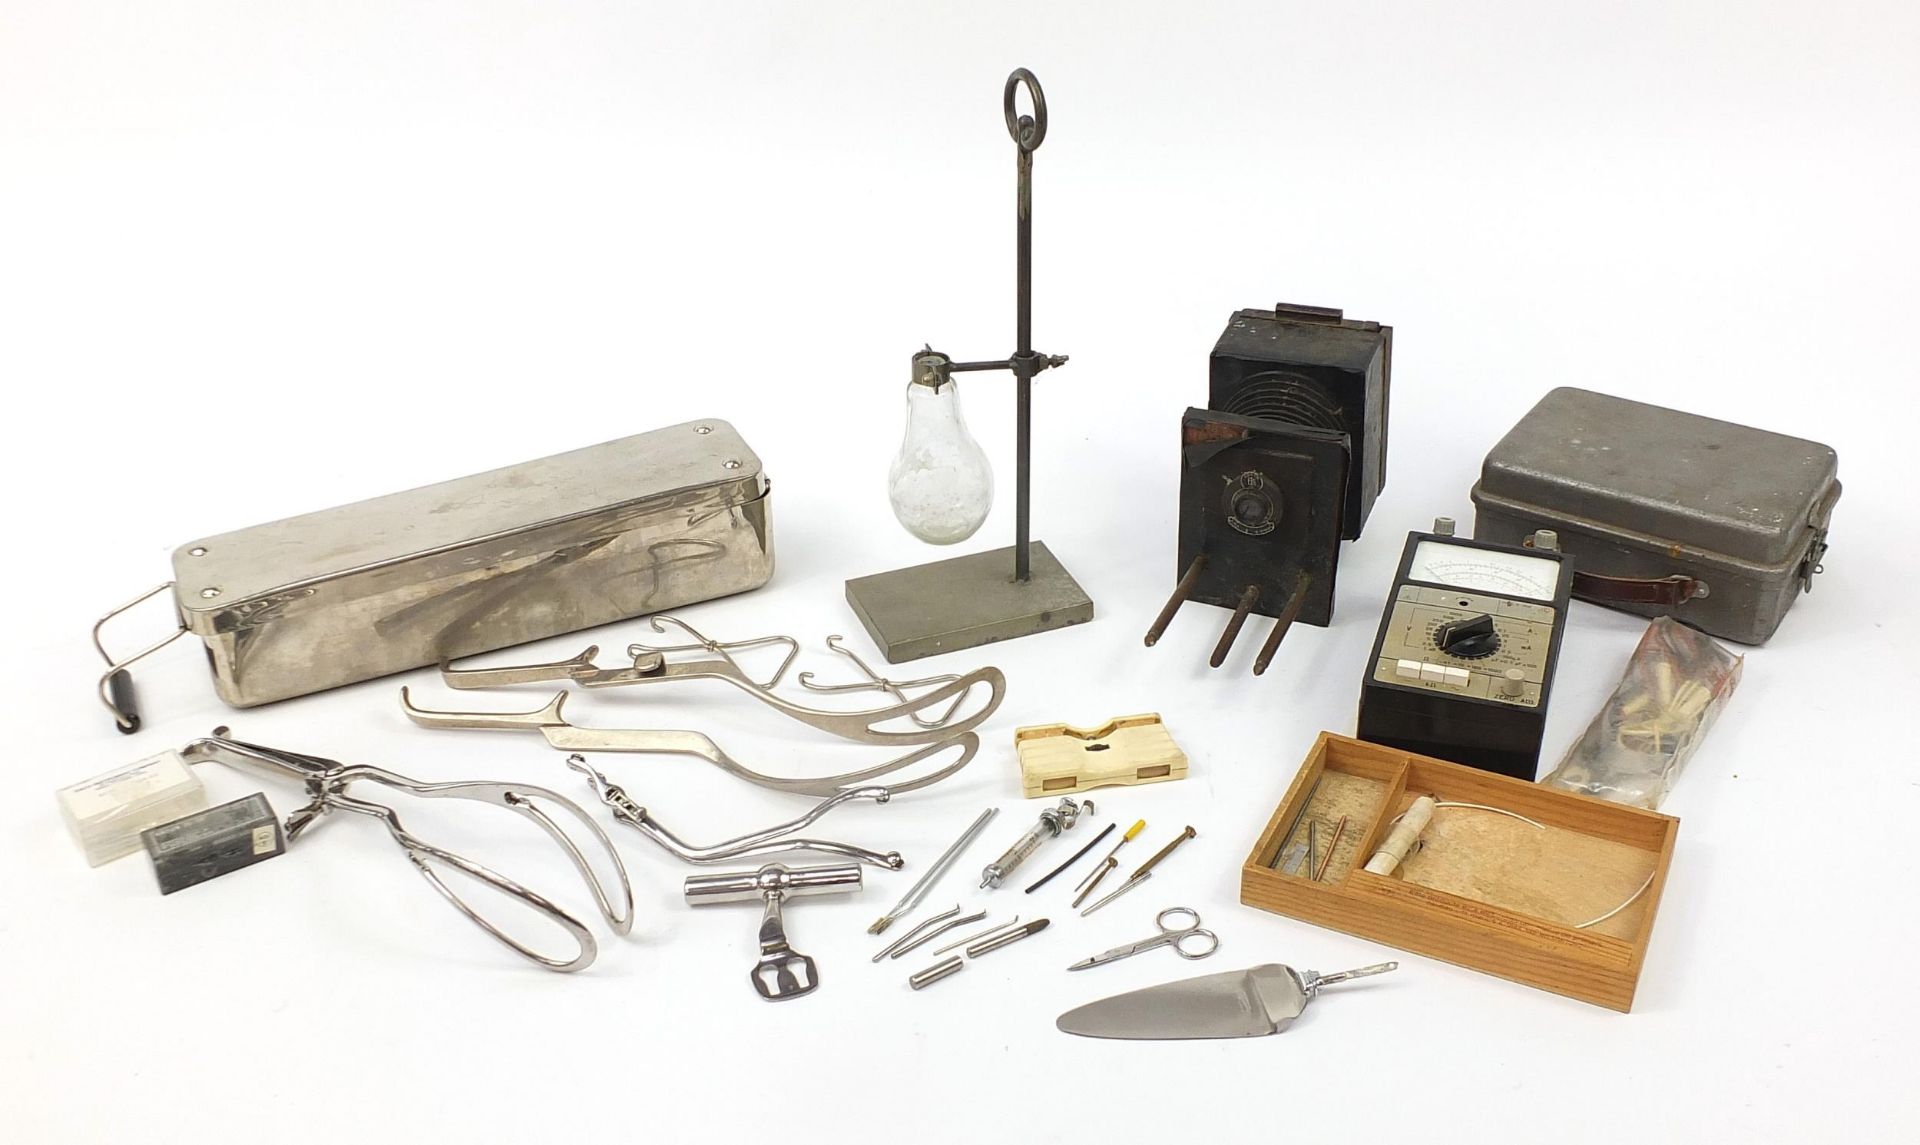 Sundry items including Kodak plate camera and vintage G F Thackray medical instruments